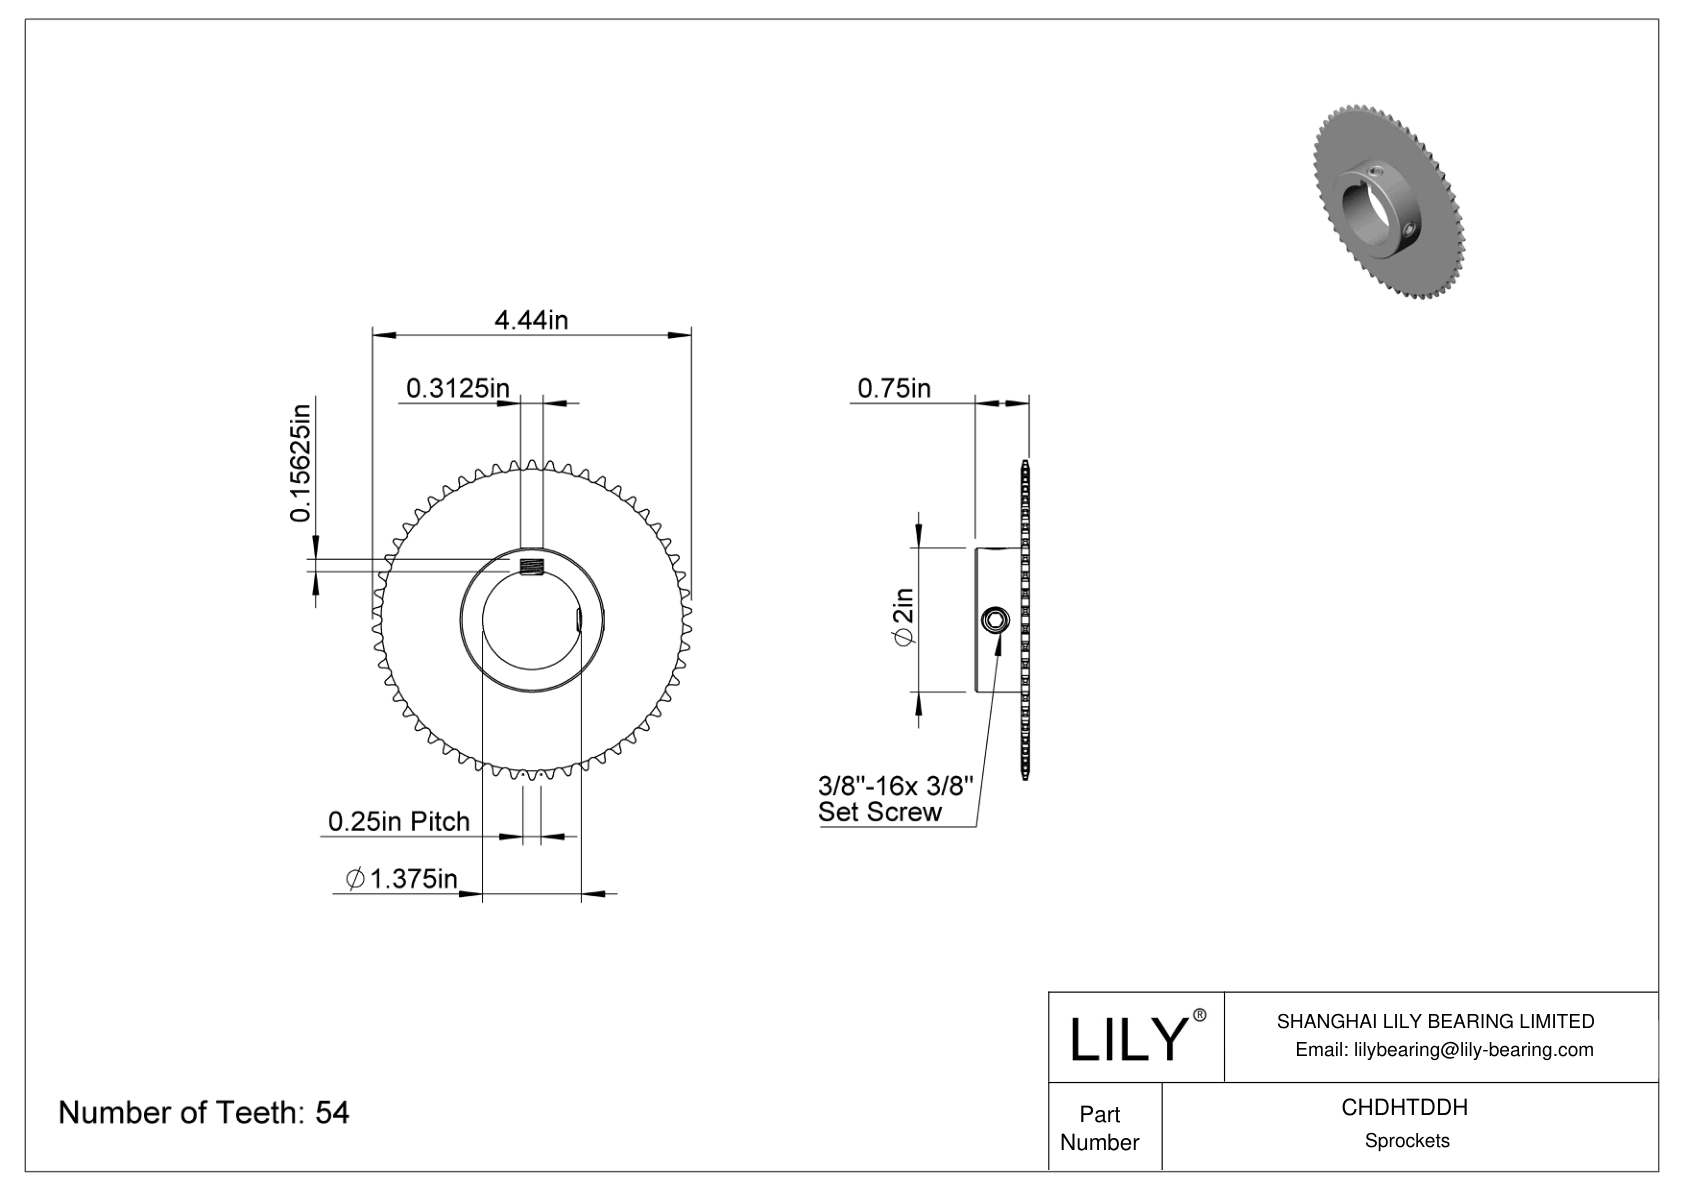 CHDHTDDH Sprockets for ANSI Roller Chain cad drawing